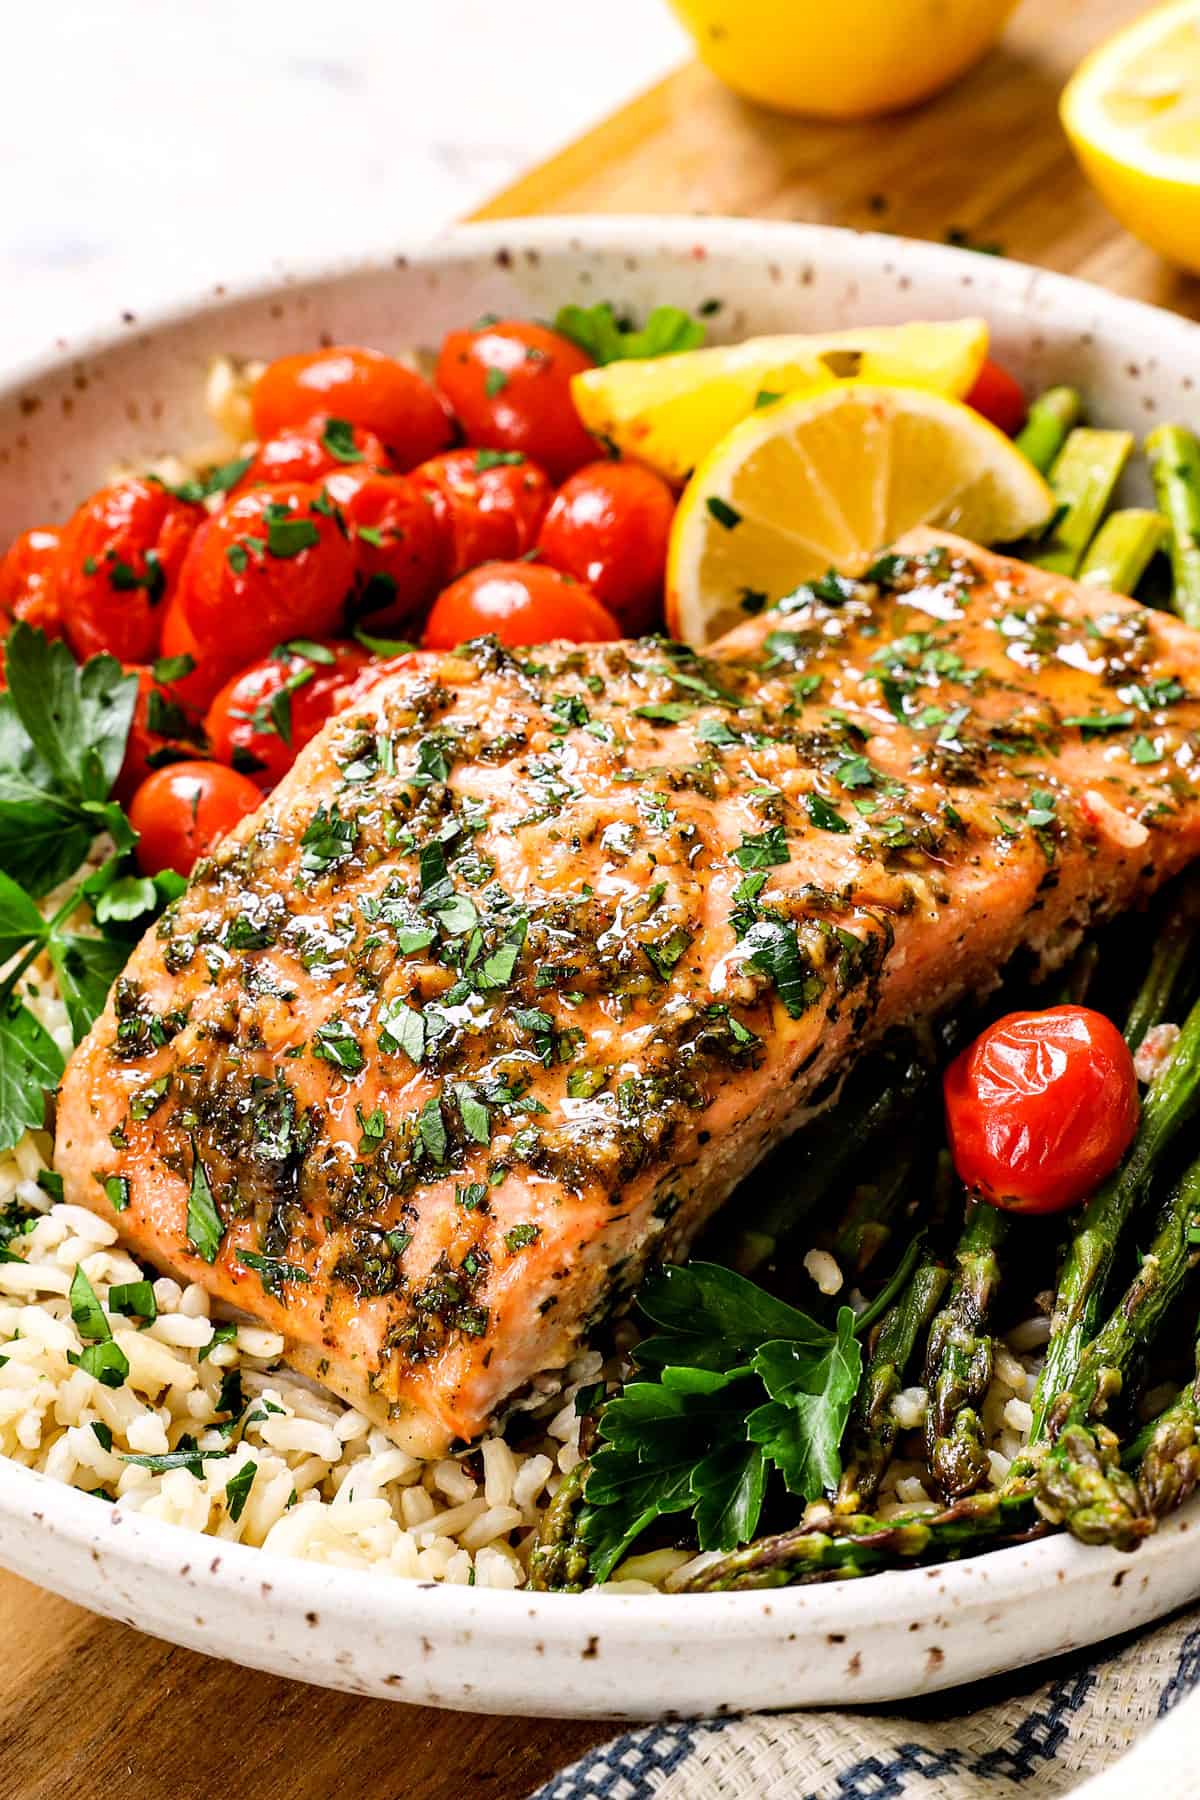 salmon baked in oven being served with rice, tomatoes and asparagus